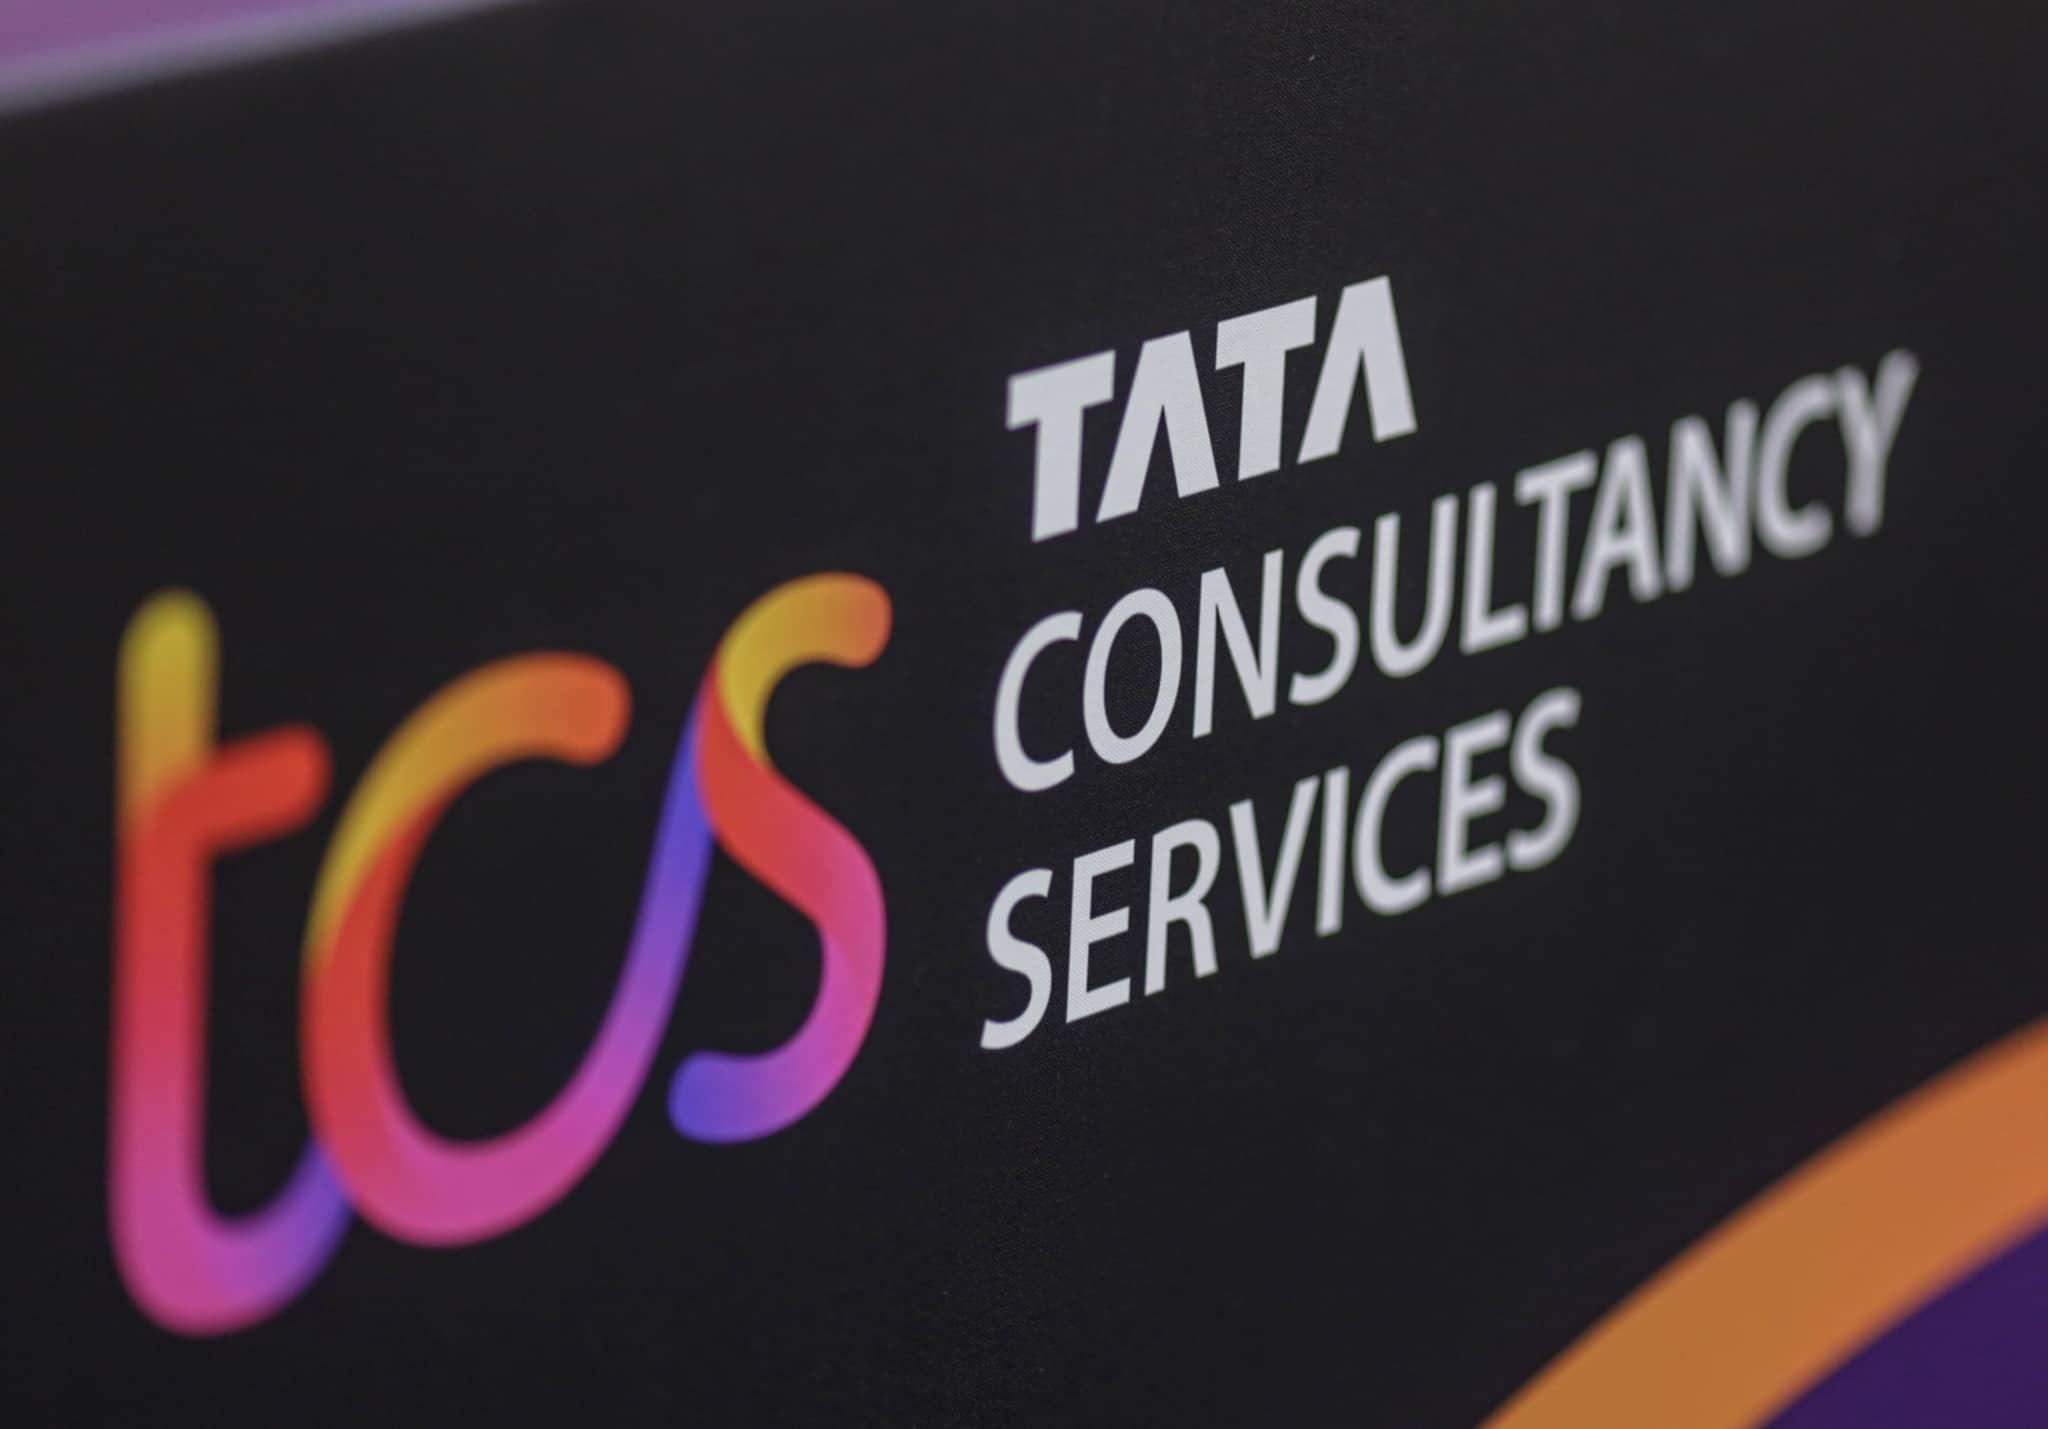 It's India shining for TCS